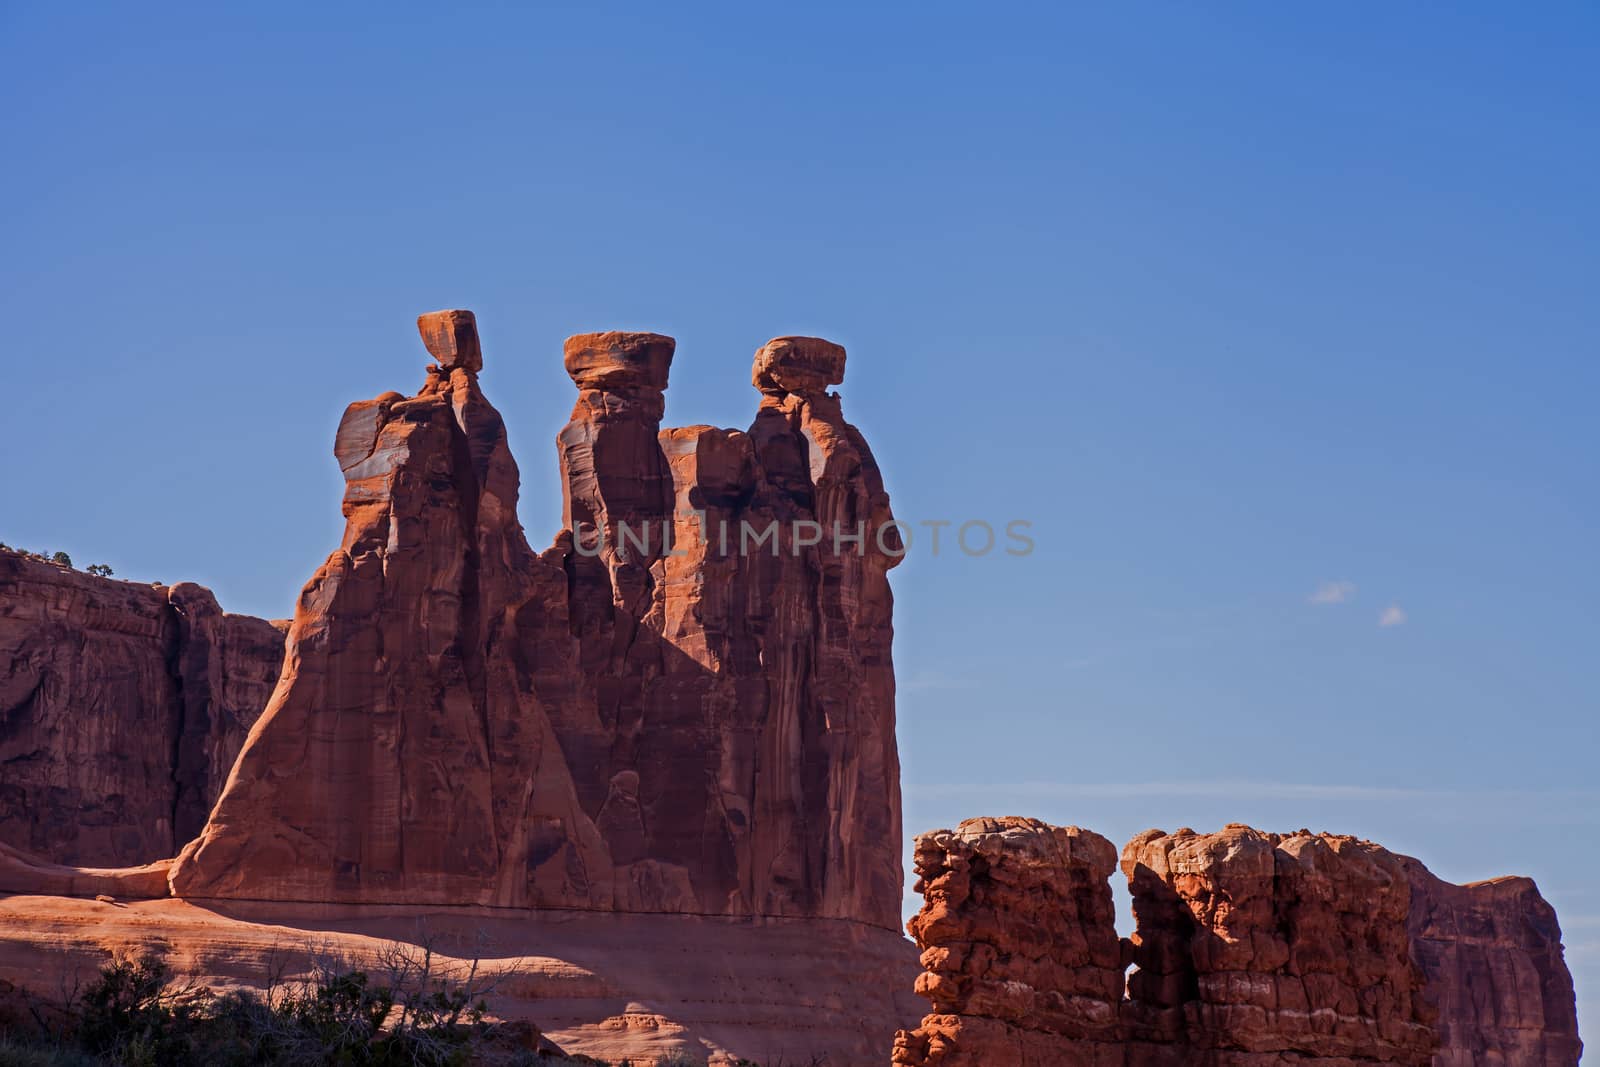 The Three Gossips Formation in Arches National Park, Utah.